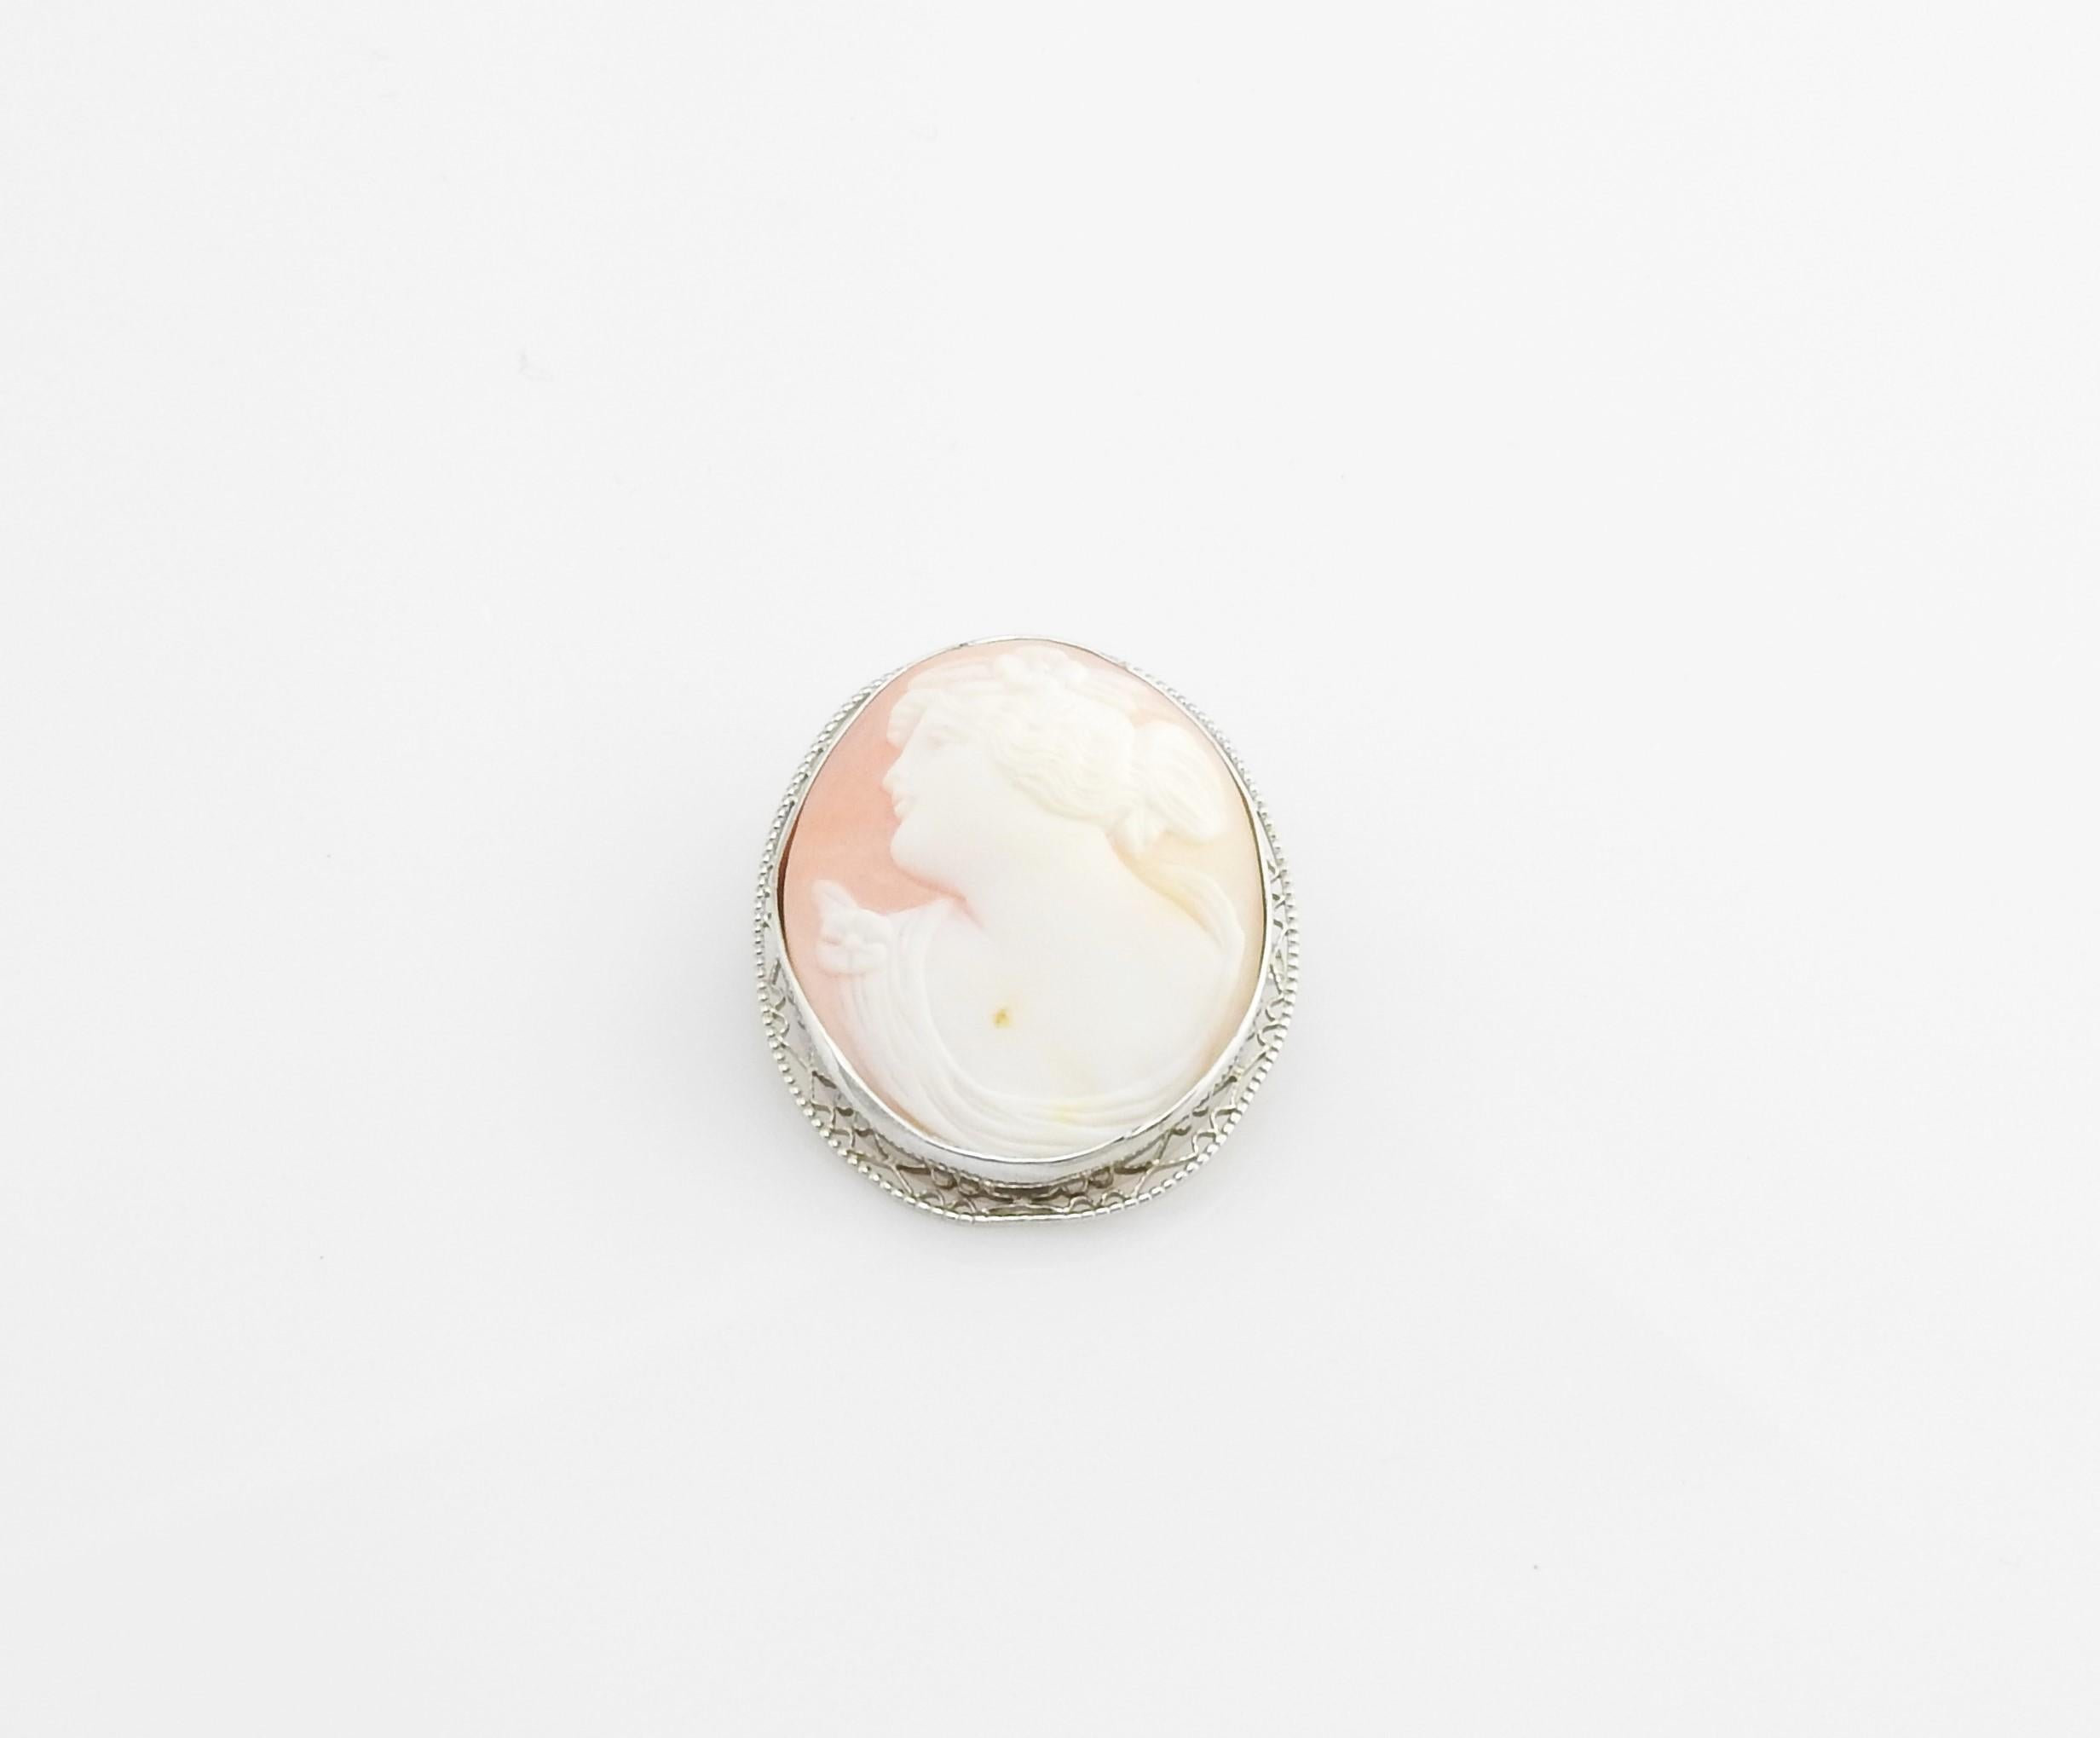 10 Karat White Gold Cameo Brooch / Pin For Sale 1